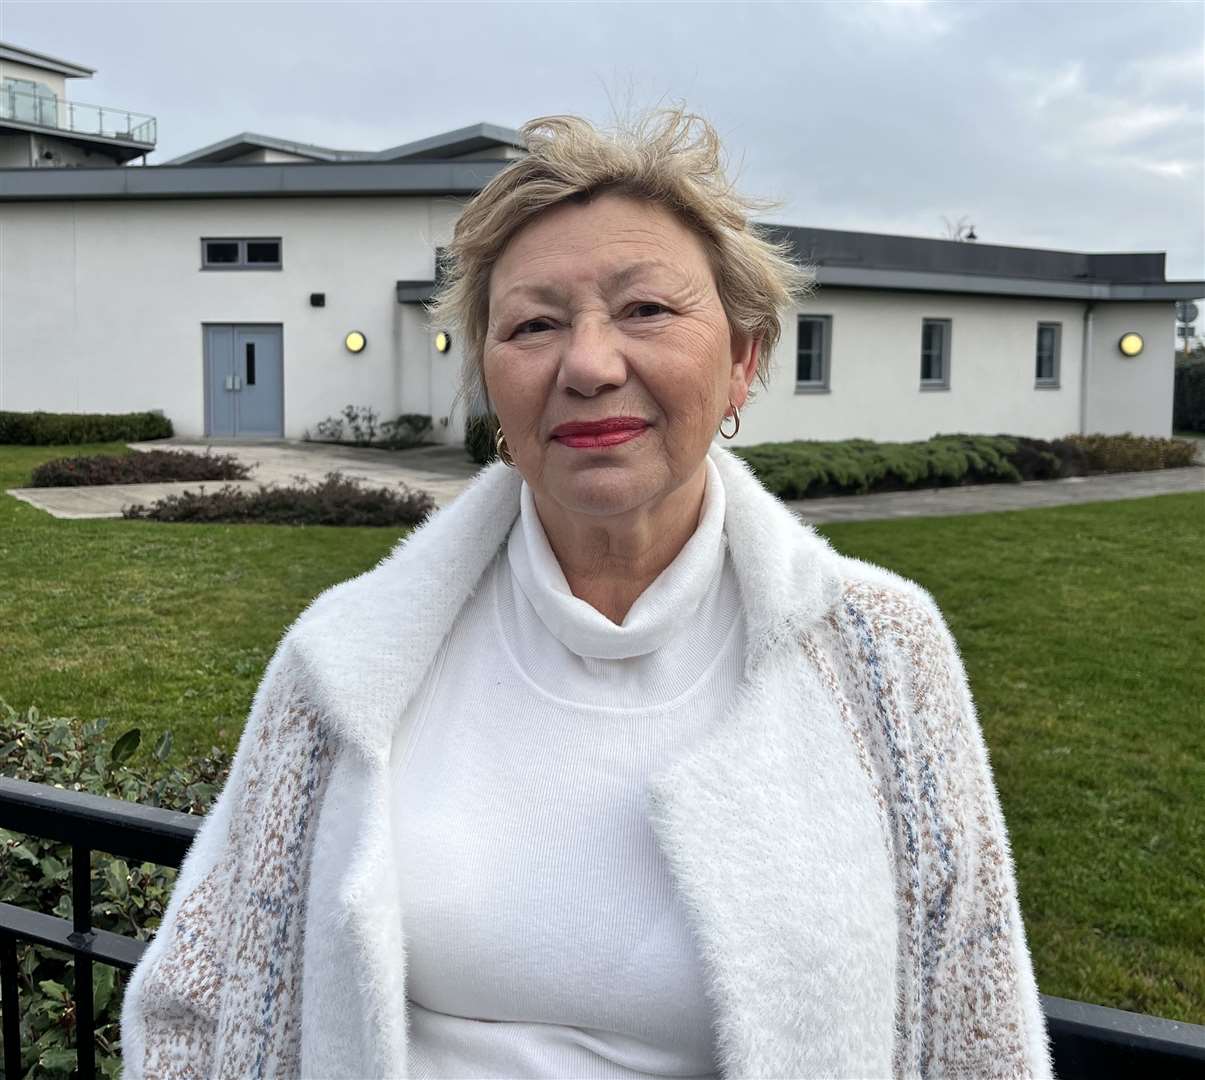 Ingress Park resident Cally Gale is keen to see the community centre opened as soon as possible